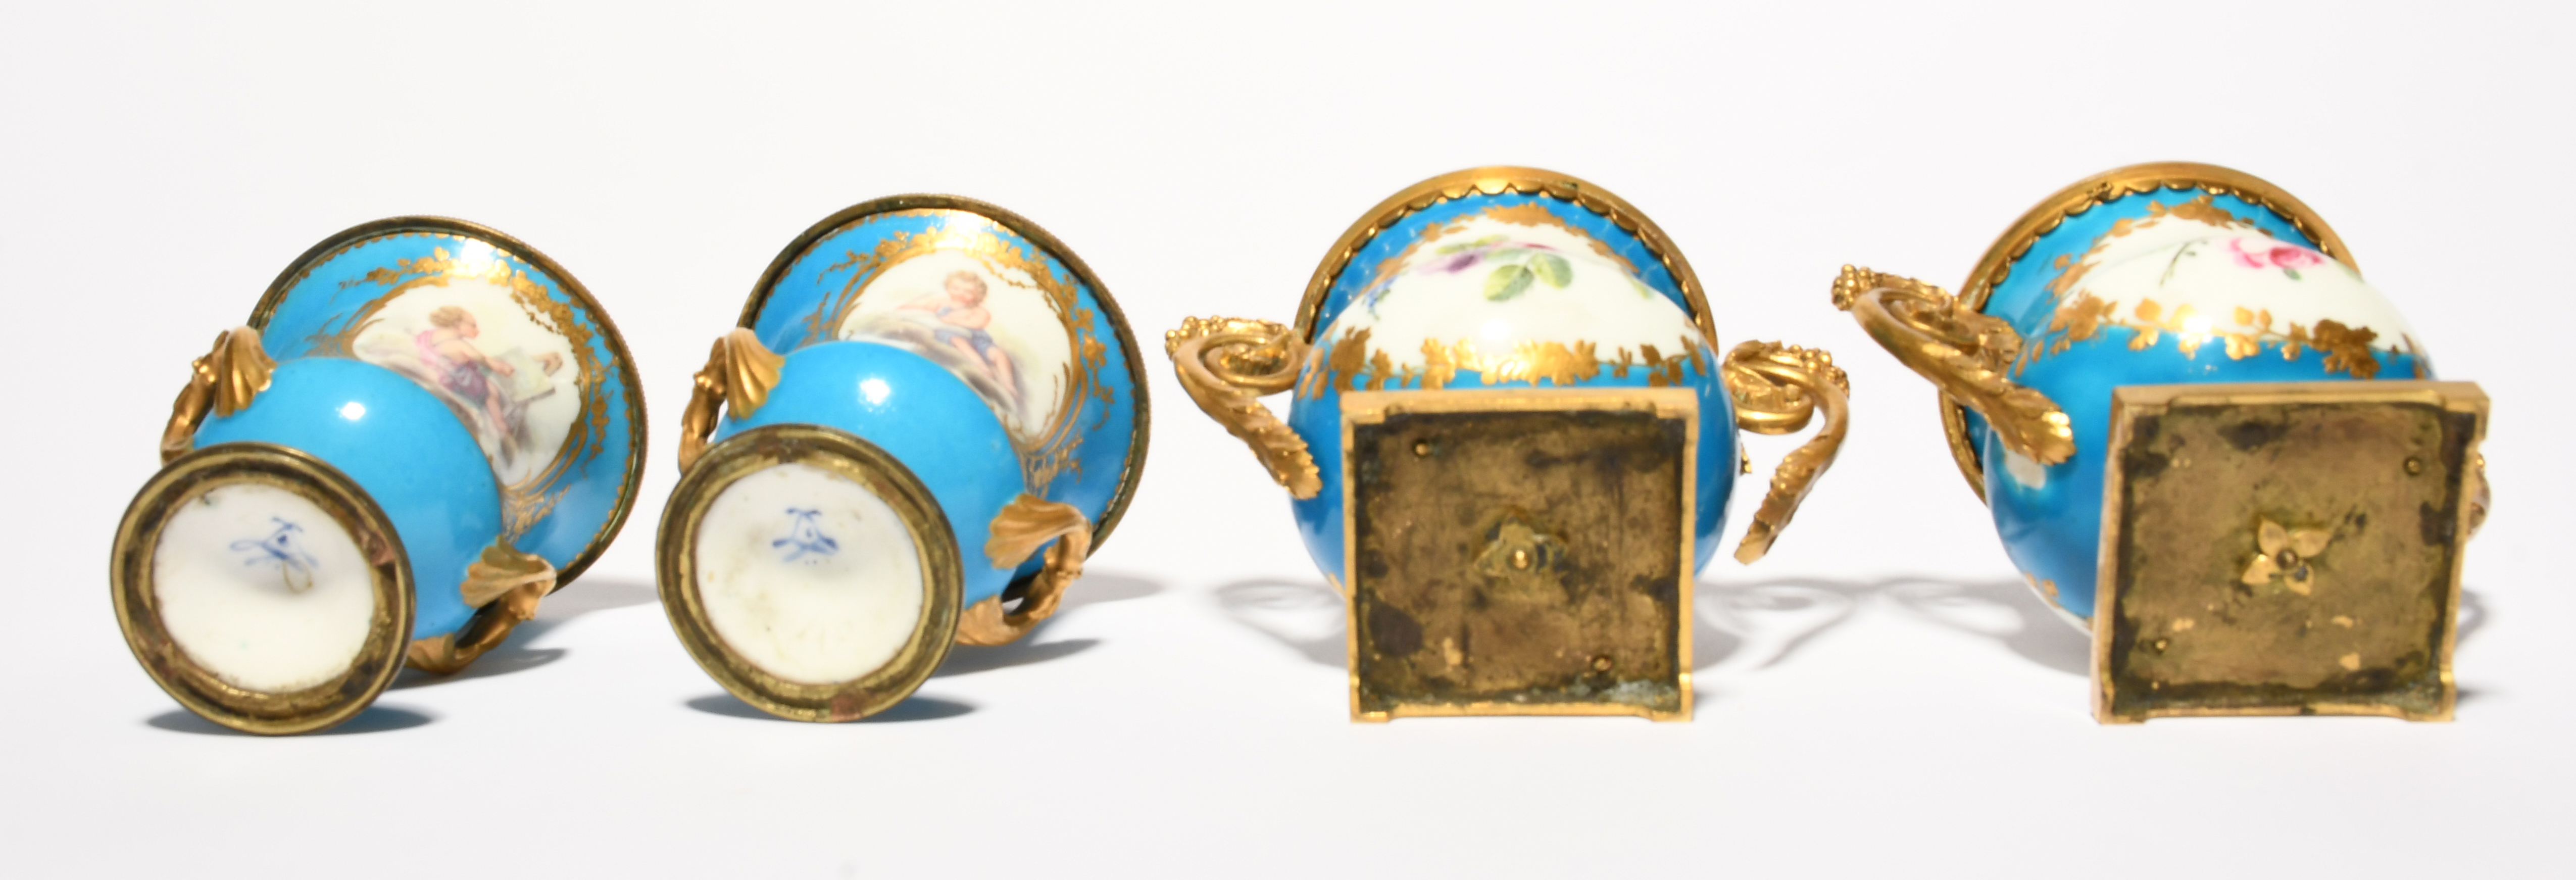 A pair of Sèvres ormolu-mounted small vases, 2nd half 18th century, painted with flower sprays - Image 2 of 3